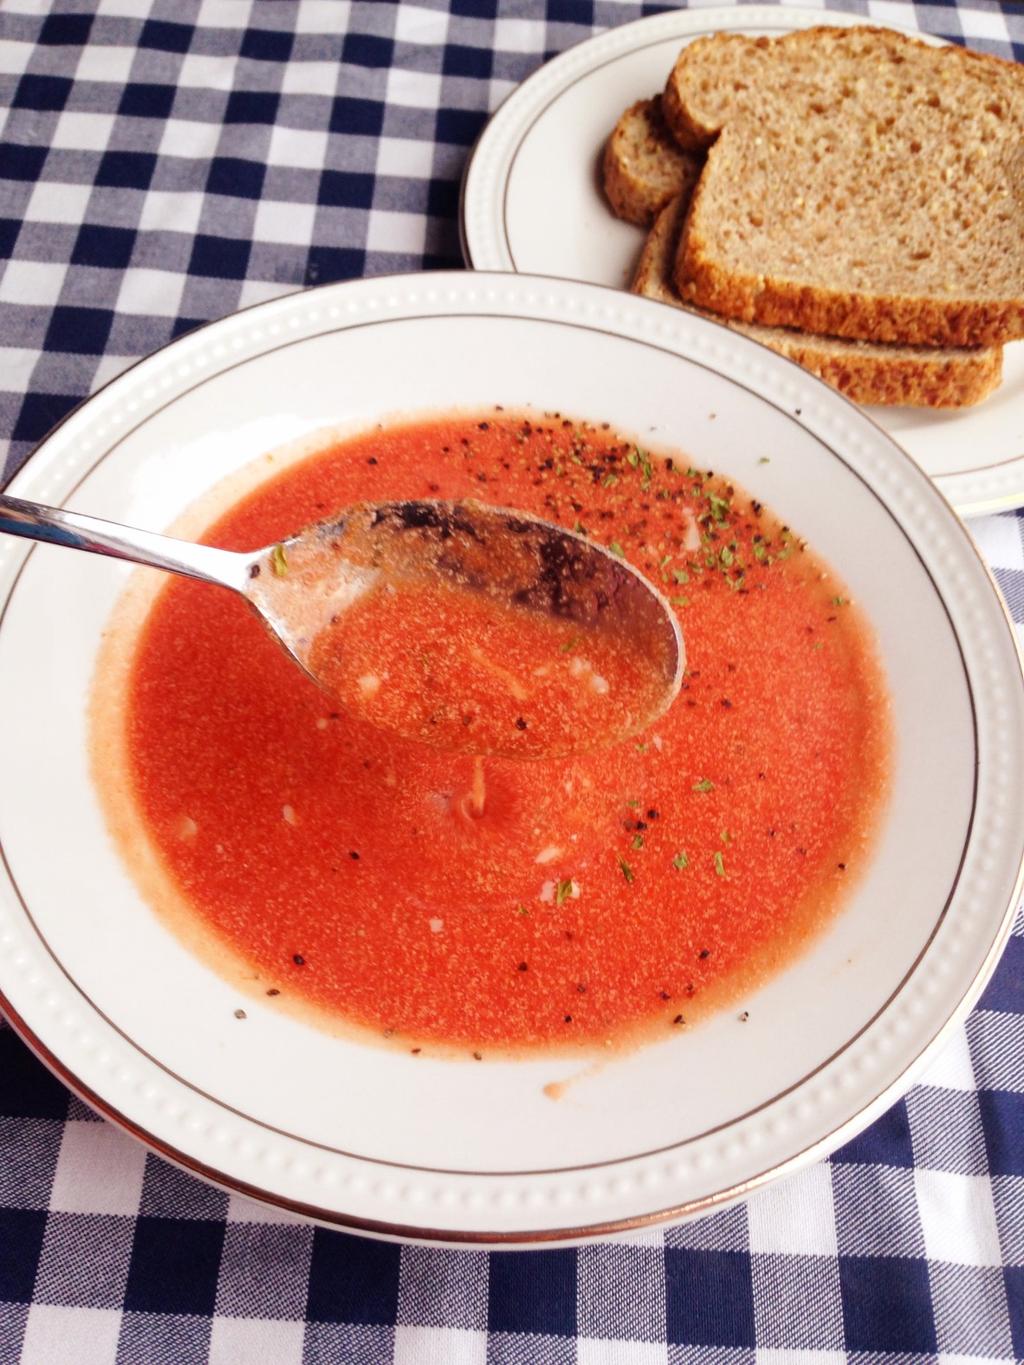 simple tomato soup cook time 5 min 2 Ingredients 8 oz tomato sauce 1 C of water or chicken broth 2-4 T of heavy cream Pour the tomato sauce into a saucepan.